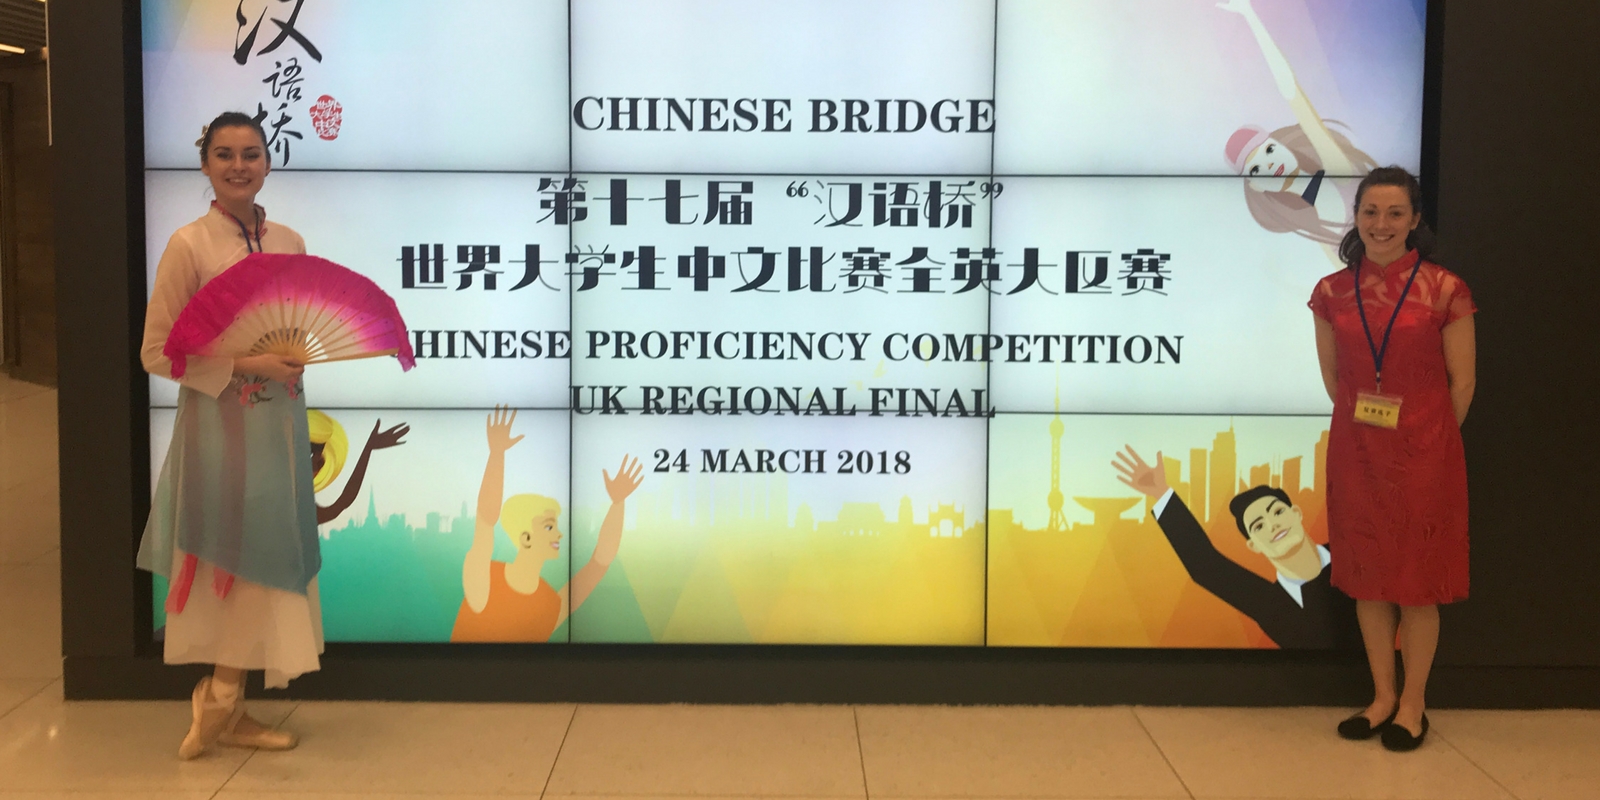 Two Chinese Bridge competitors in front of the competition sign